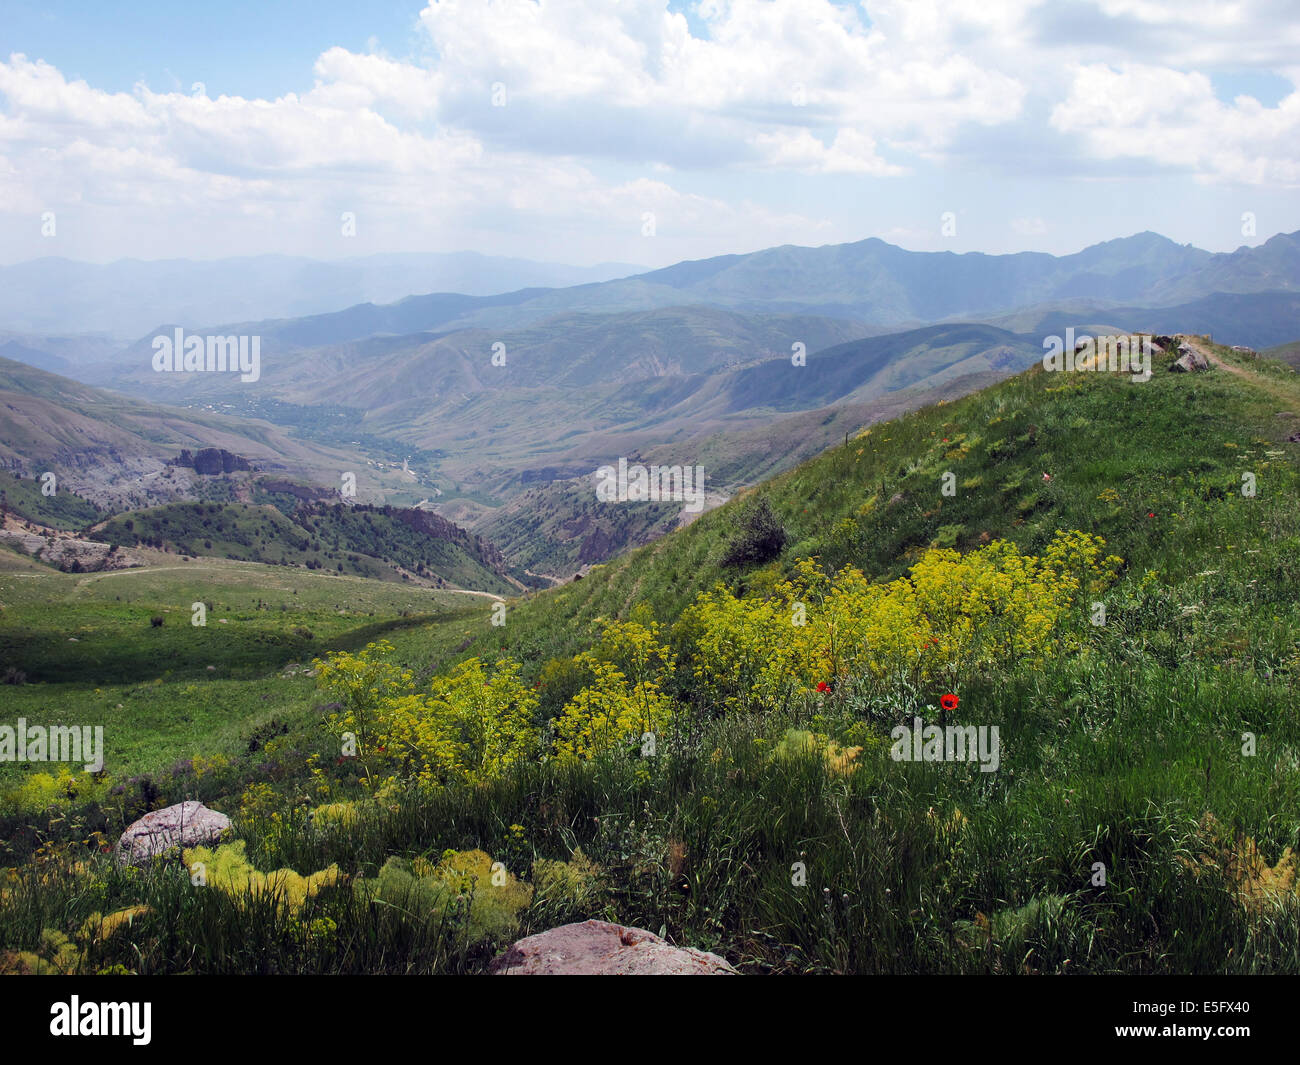 The green mountain landscape at the Selim Pass in the Selim Mountains in Armenia, 24 June 2014. Photo: Jens Kalaene Stock Photo